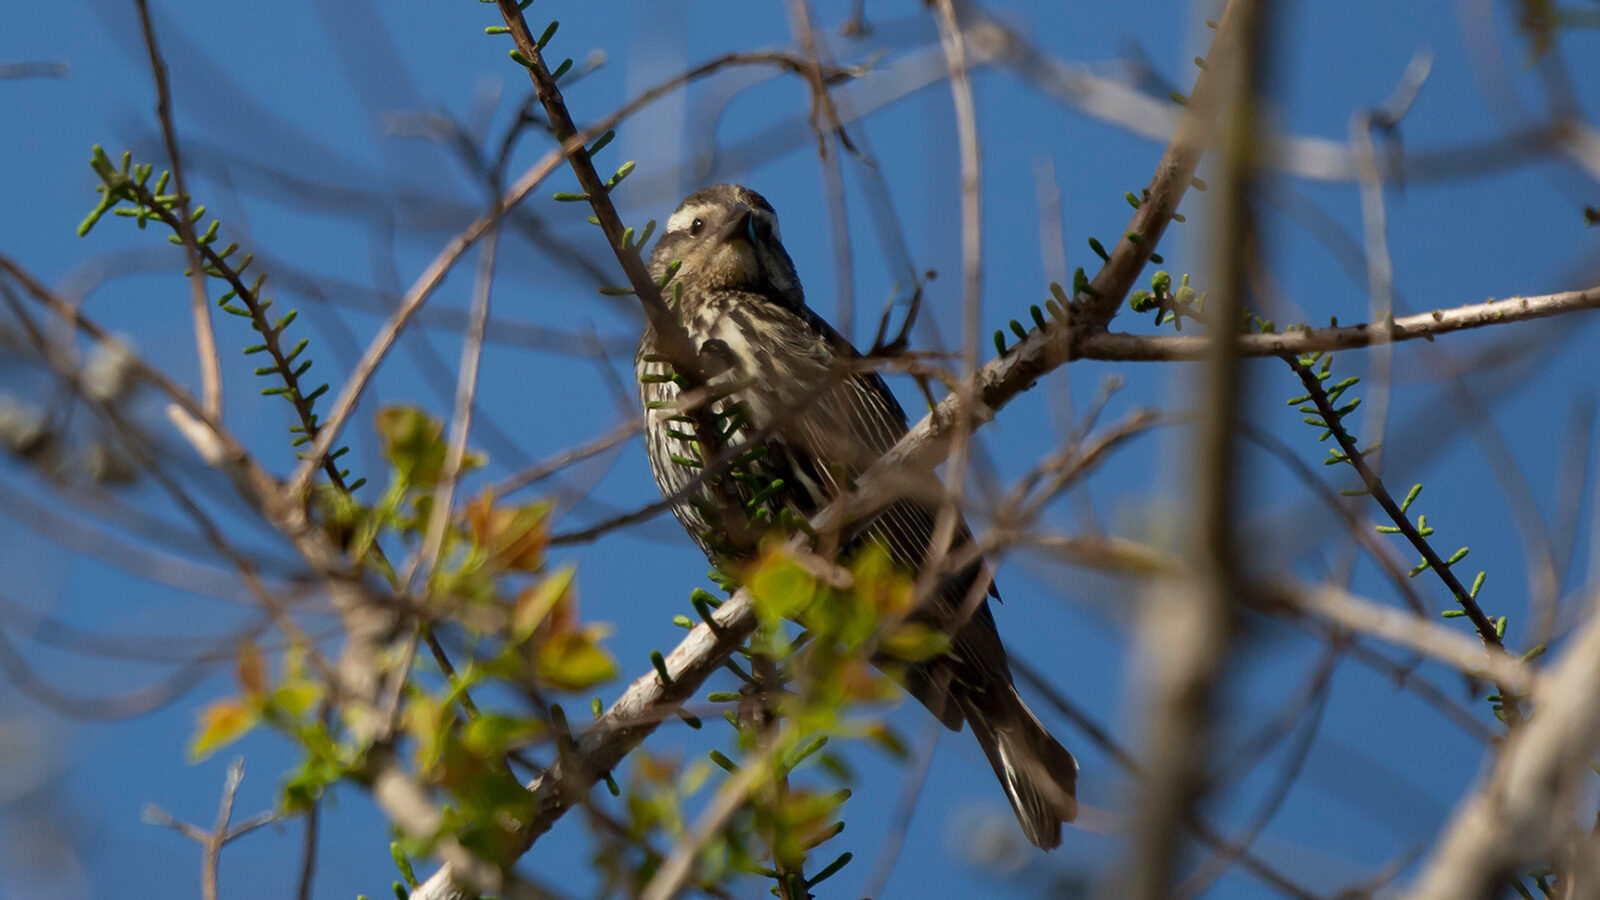 Female red-winged blackbird looking out majestically from its perch on a tree branch